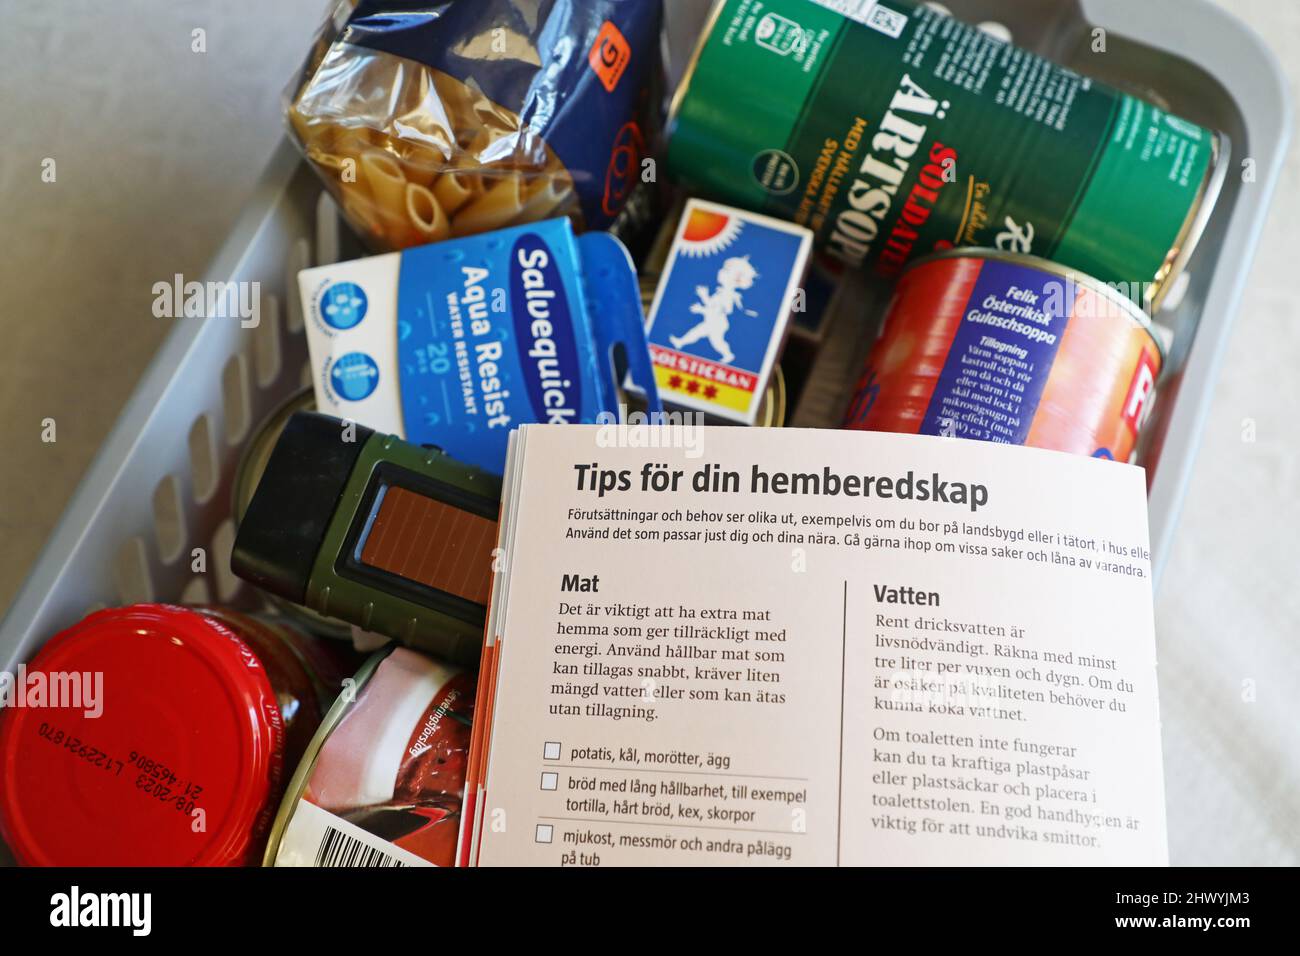 'If the war comes' information and and a box of food and other necessities in a home that might be needed in a crisis or war. Information on tips for your home equipment. 'If the war comes' (Swedish: Om kriget kommer) is a pamphlet originally prepared by the Supreme Commander of the Swedish Armed Forces' office. Stock Photo